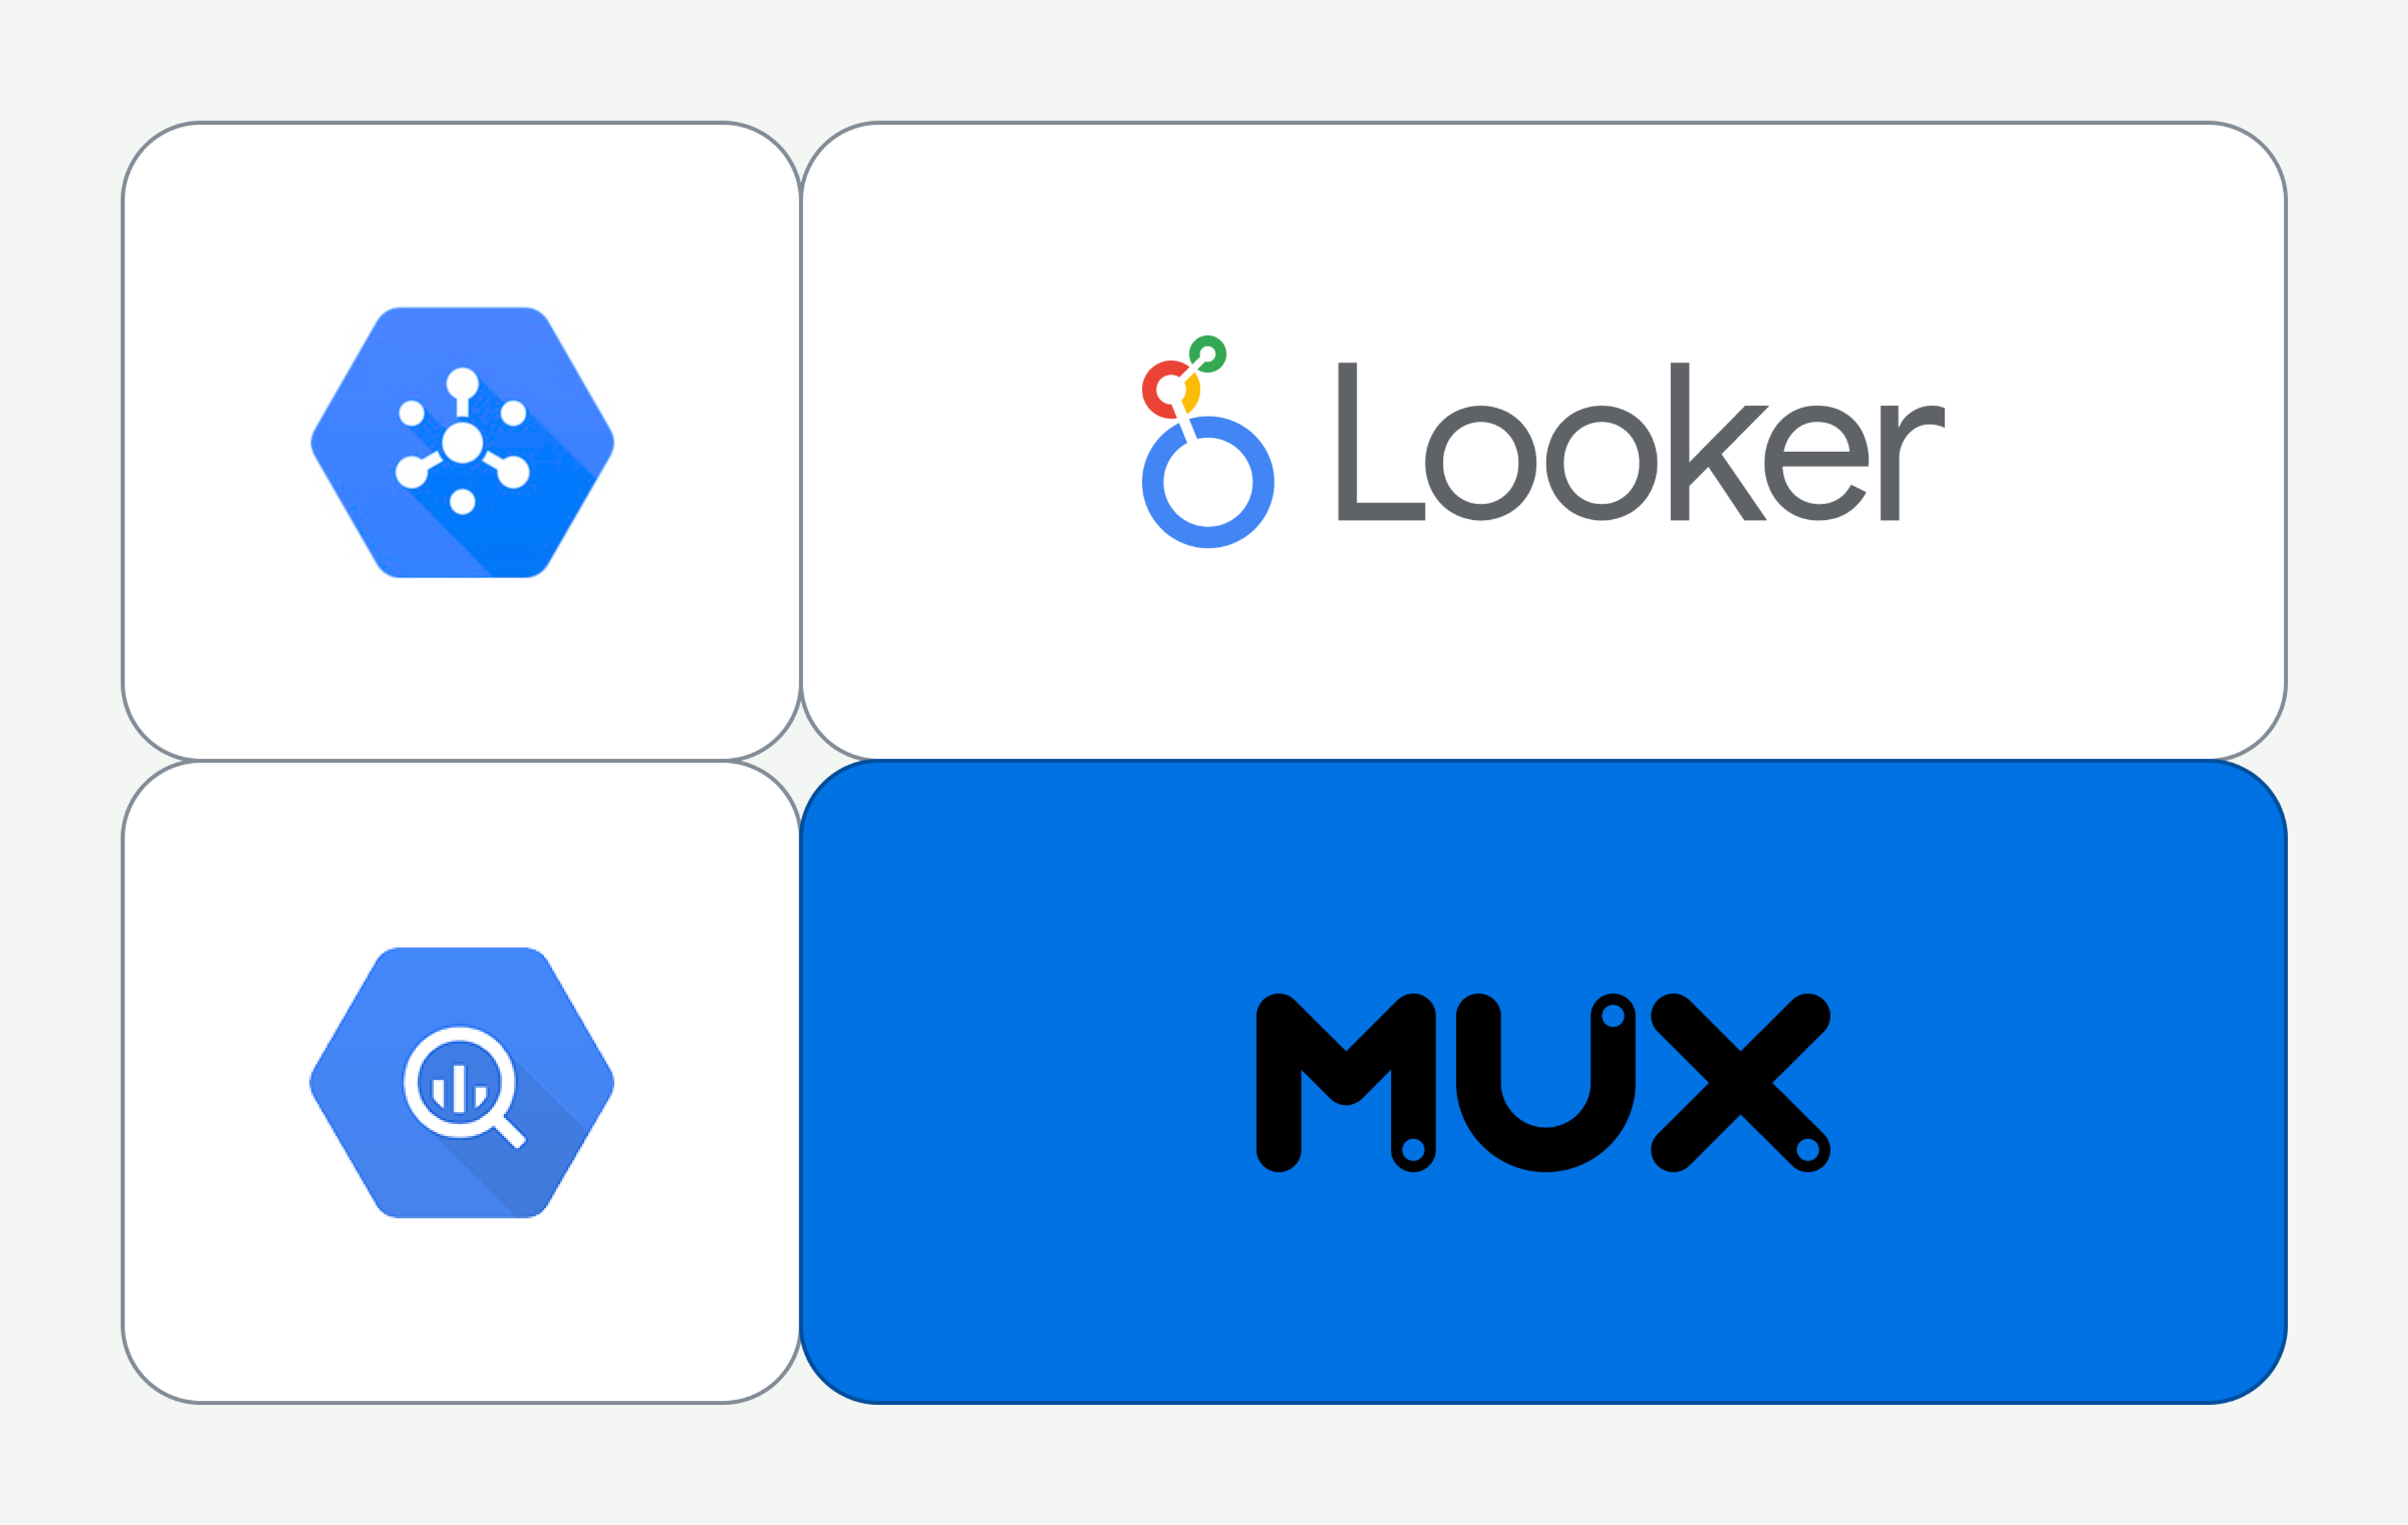 A grid containing the logos for Google BigQuery, Google Pub/Sub, Looker, and Mux